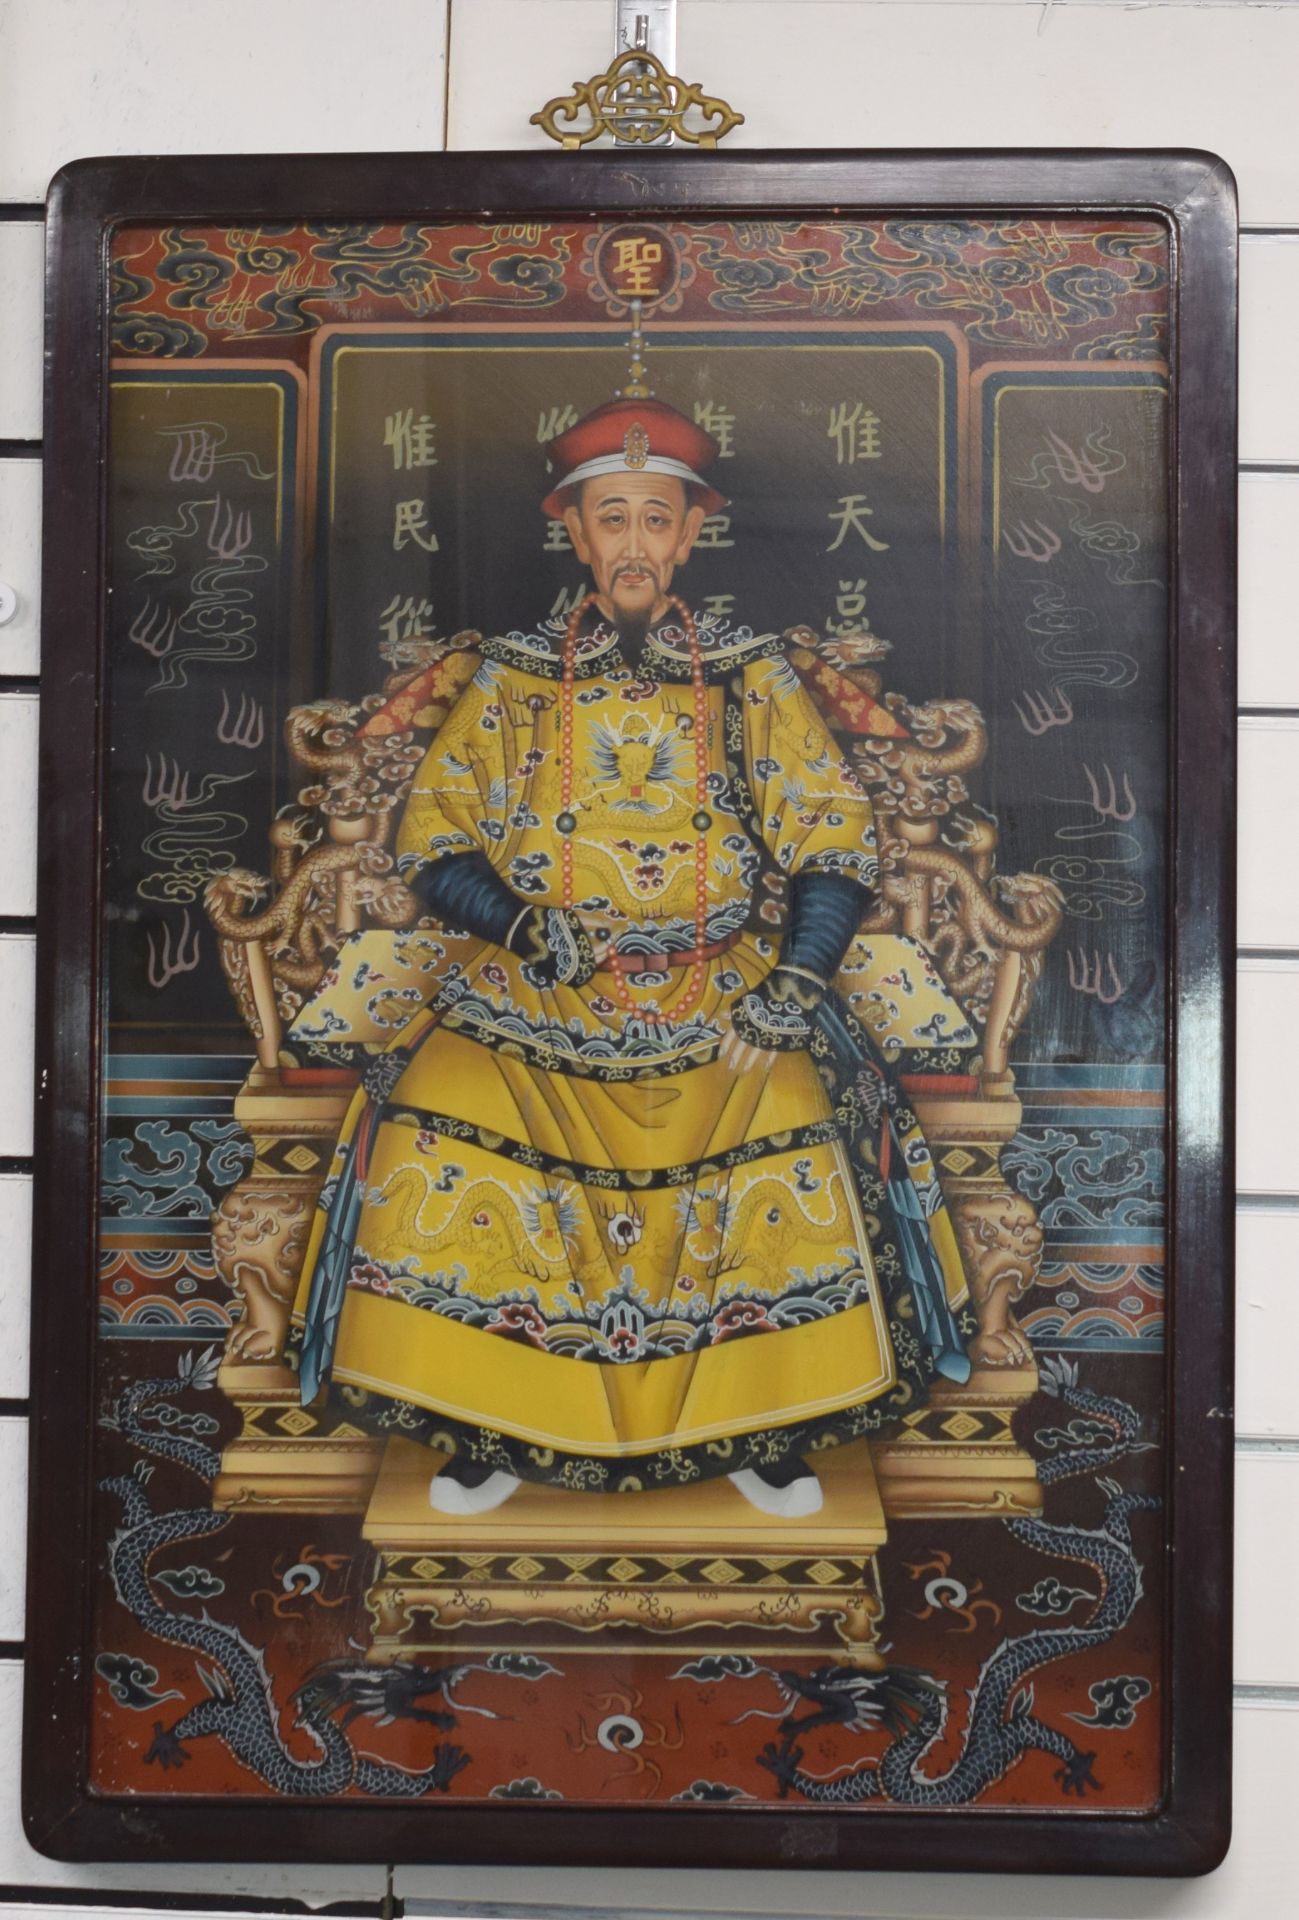 Vintage Chinese Reverse Oil On Glass Portraits Of The First Emperor & Empress Of China